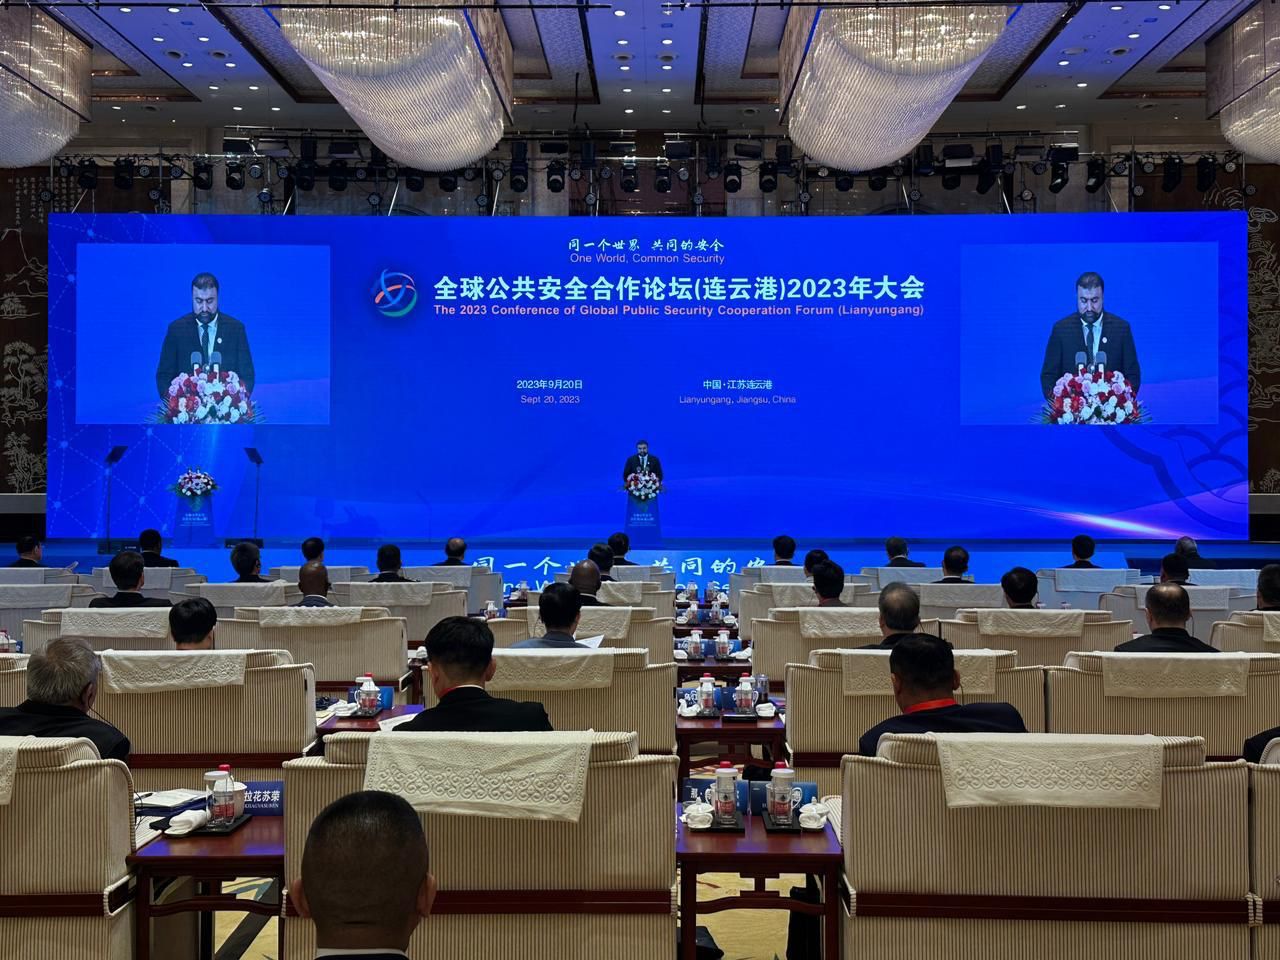 Federal Minister for Interior Sarfraz  Bugti addressed the opening session of the 2023 Conference of Global Public Security Cooperation Forum in Lianyungang, China.